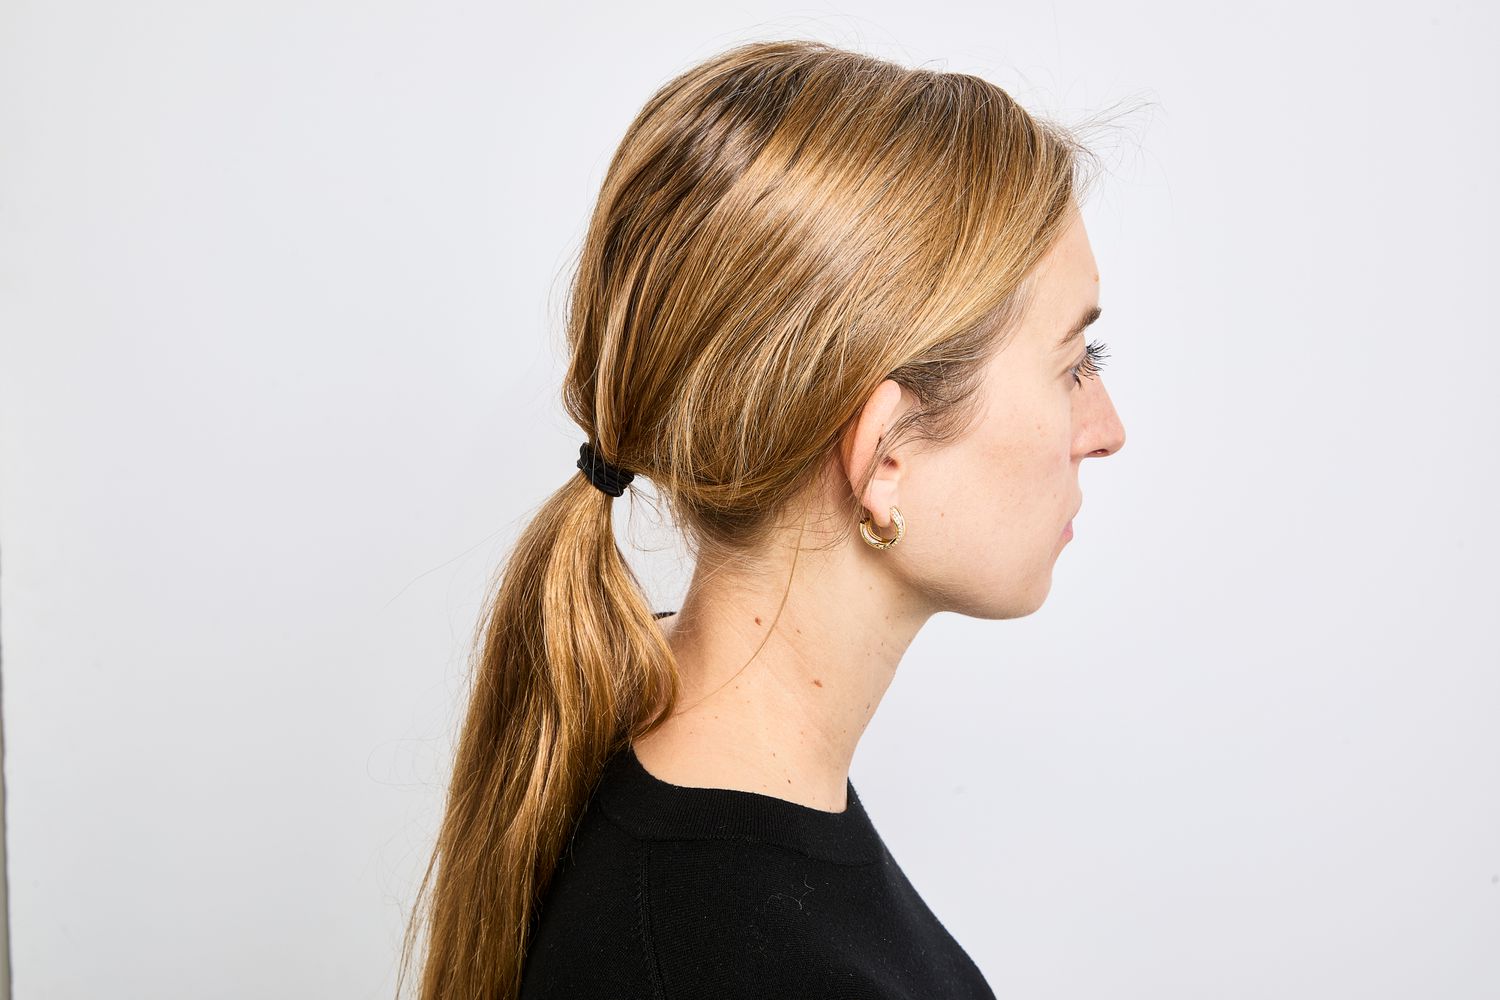 A person's hair in a ponytail after styling with BondiBoost Flex & Shine Aerosol-free Hair Spray for Brushable Hold